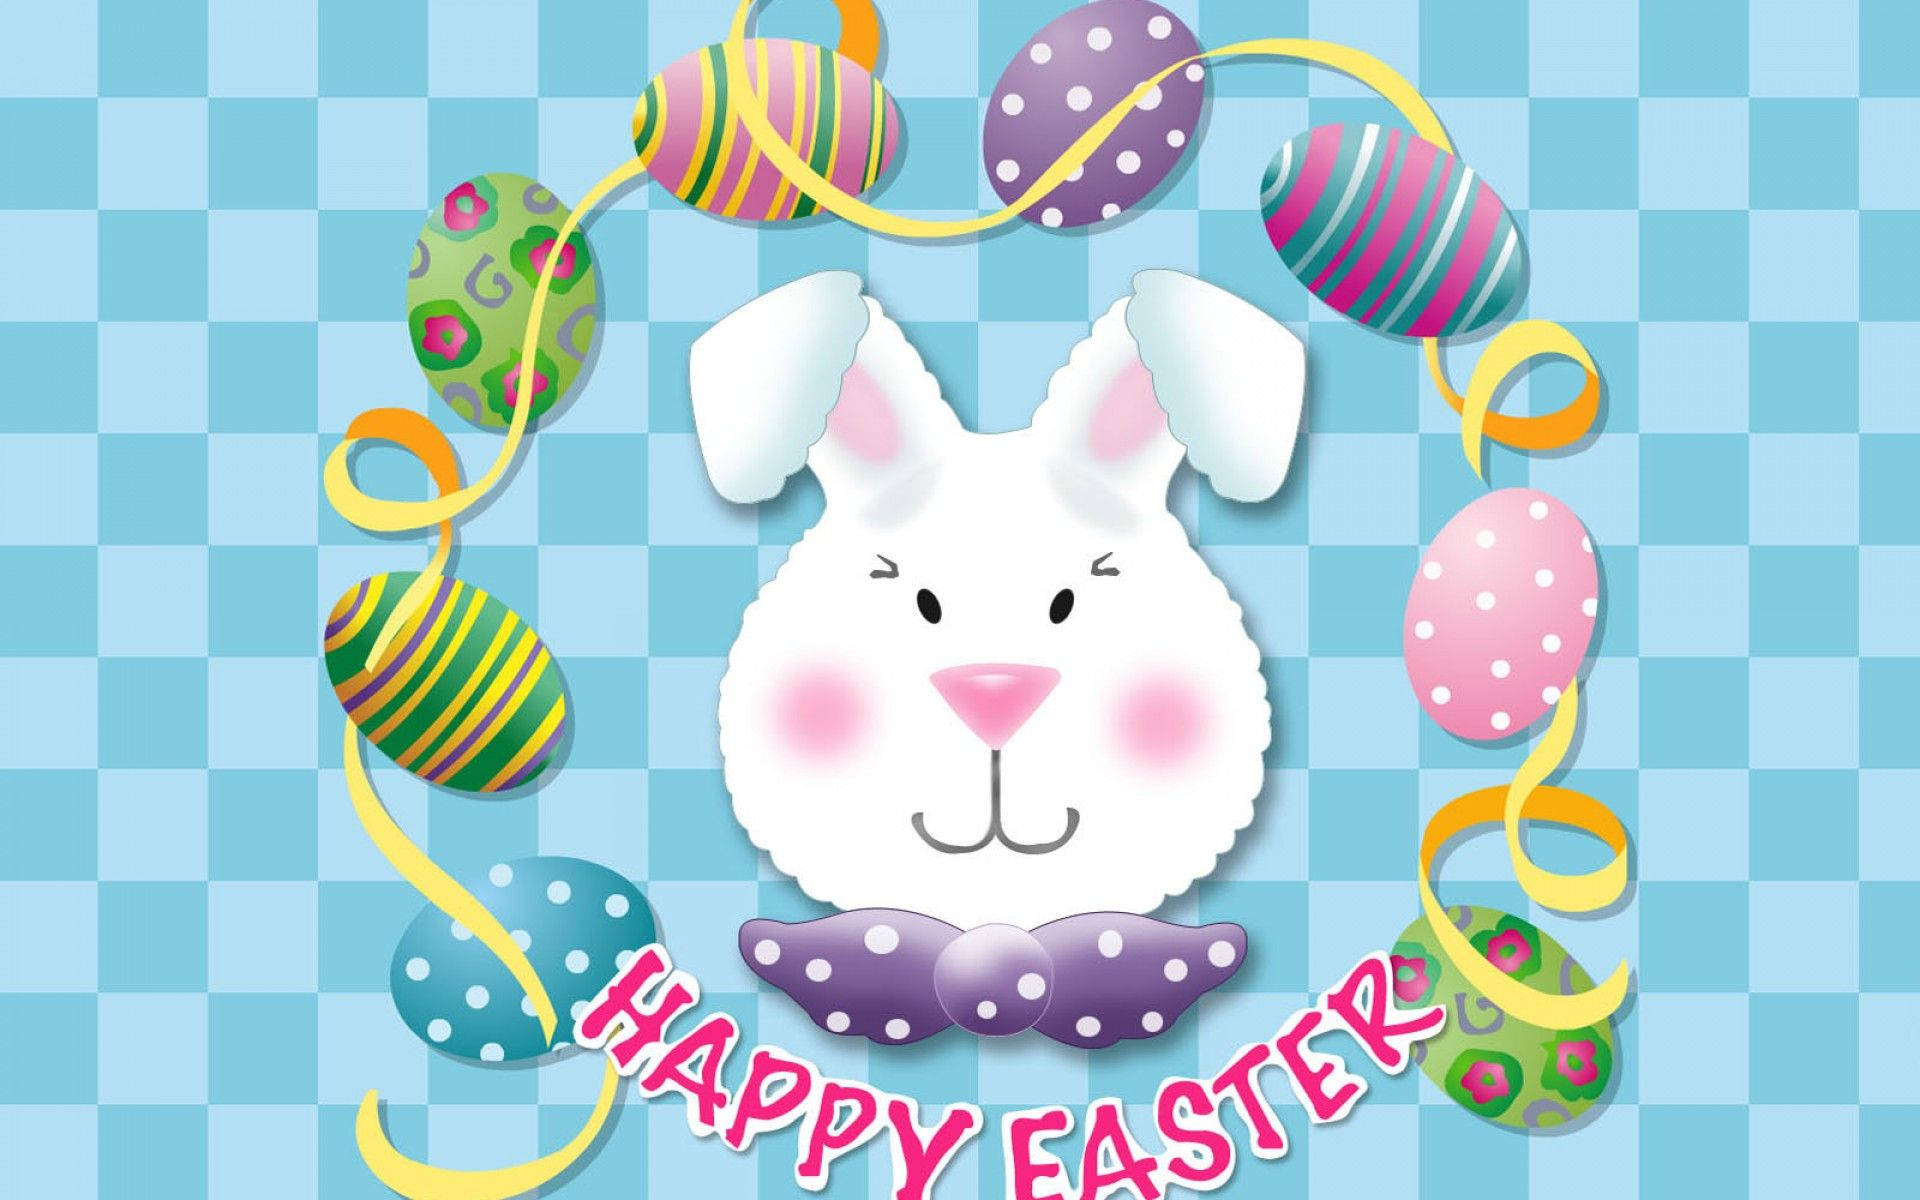 Charming Mr. Happy Easter Bunny Cartoon Background